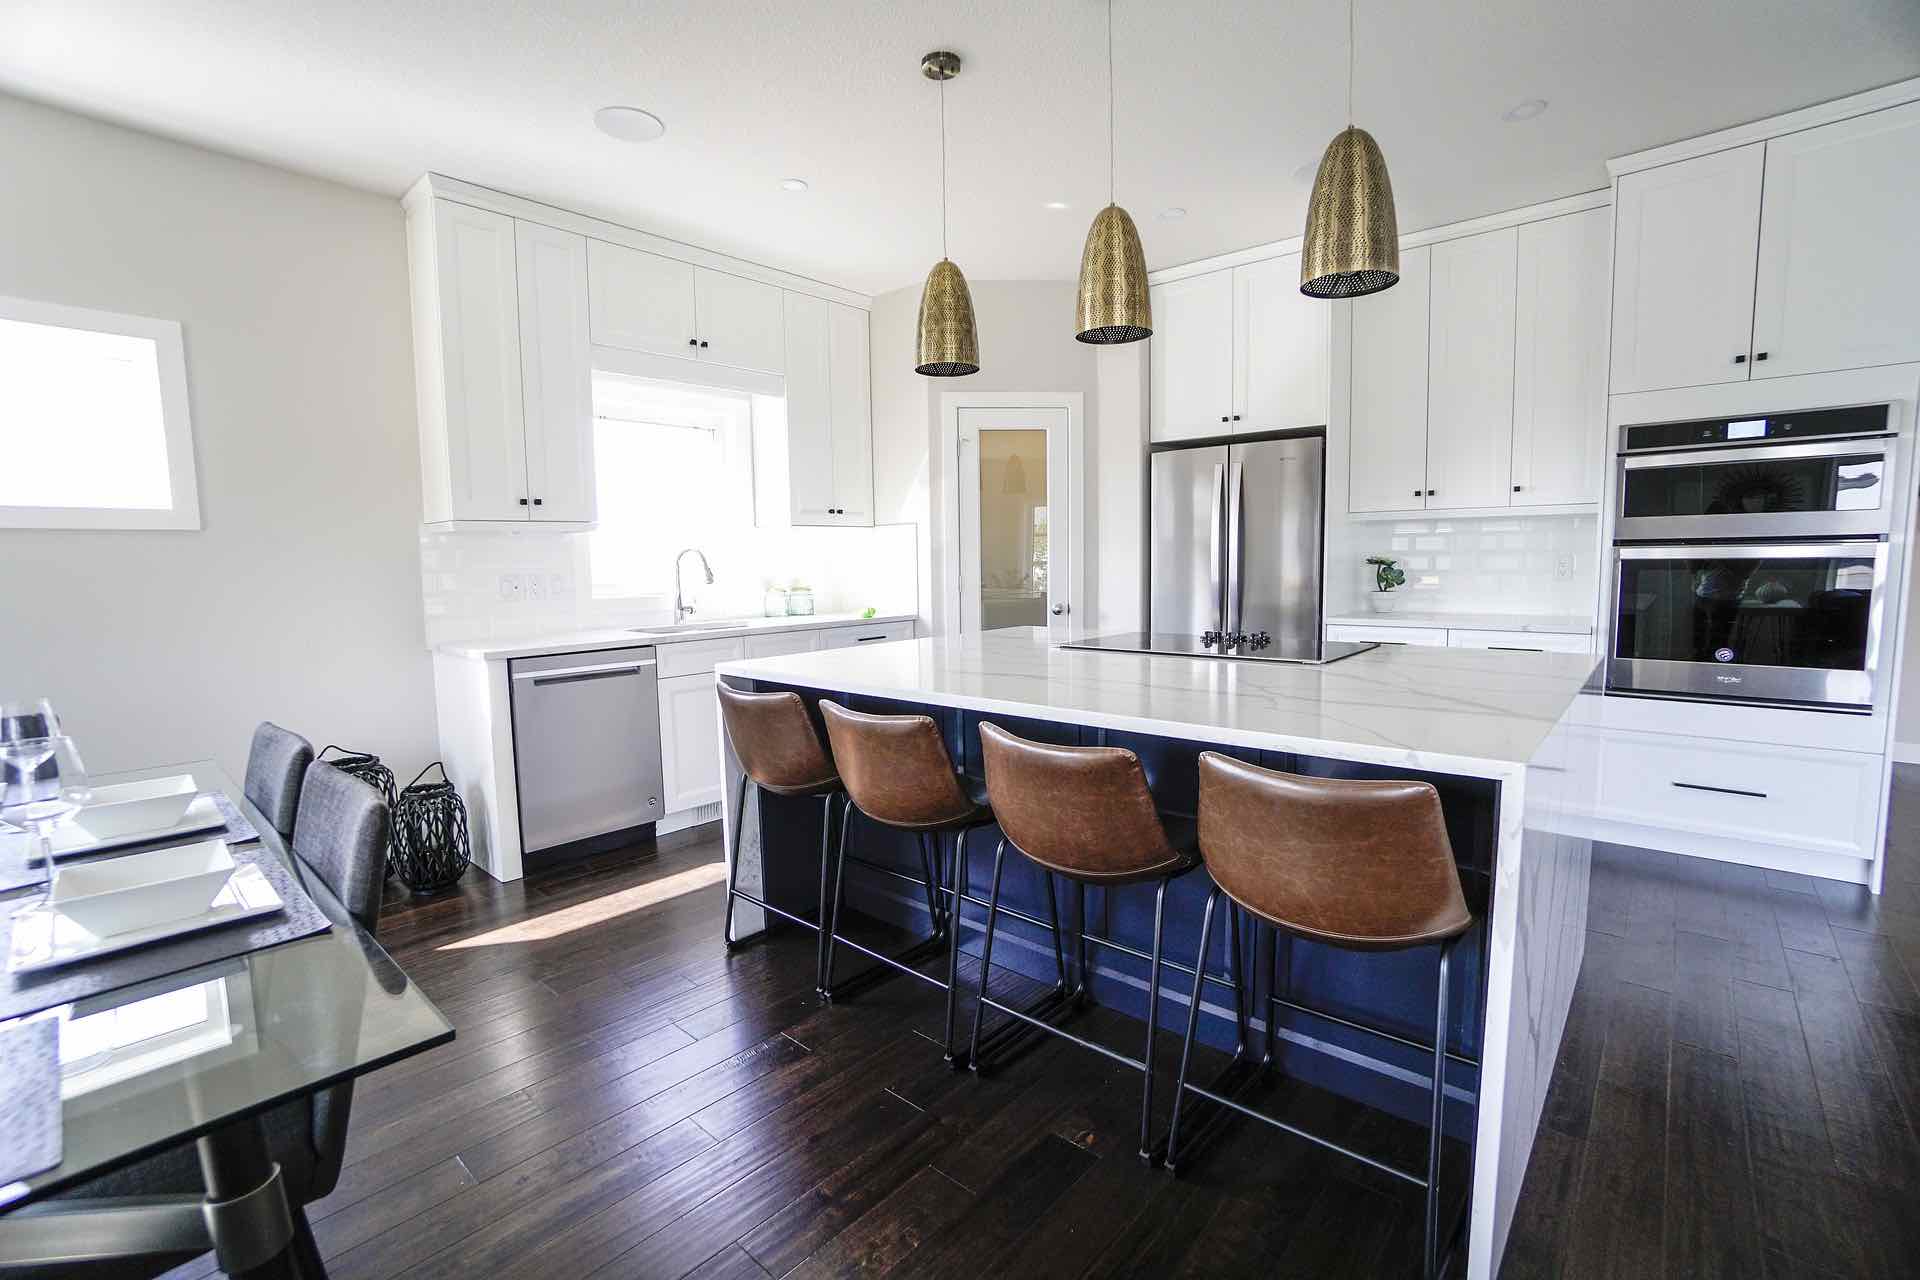 Bullet shaped pendant lights encased in bronze metal elevates the space against white cabinets and countertops